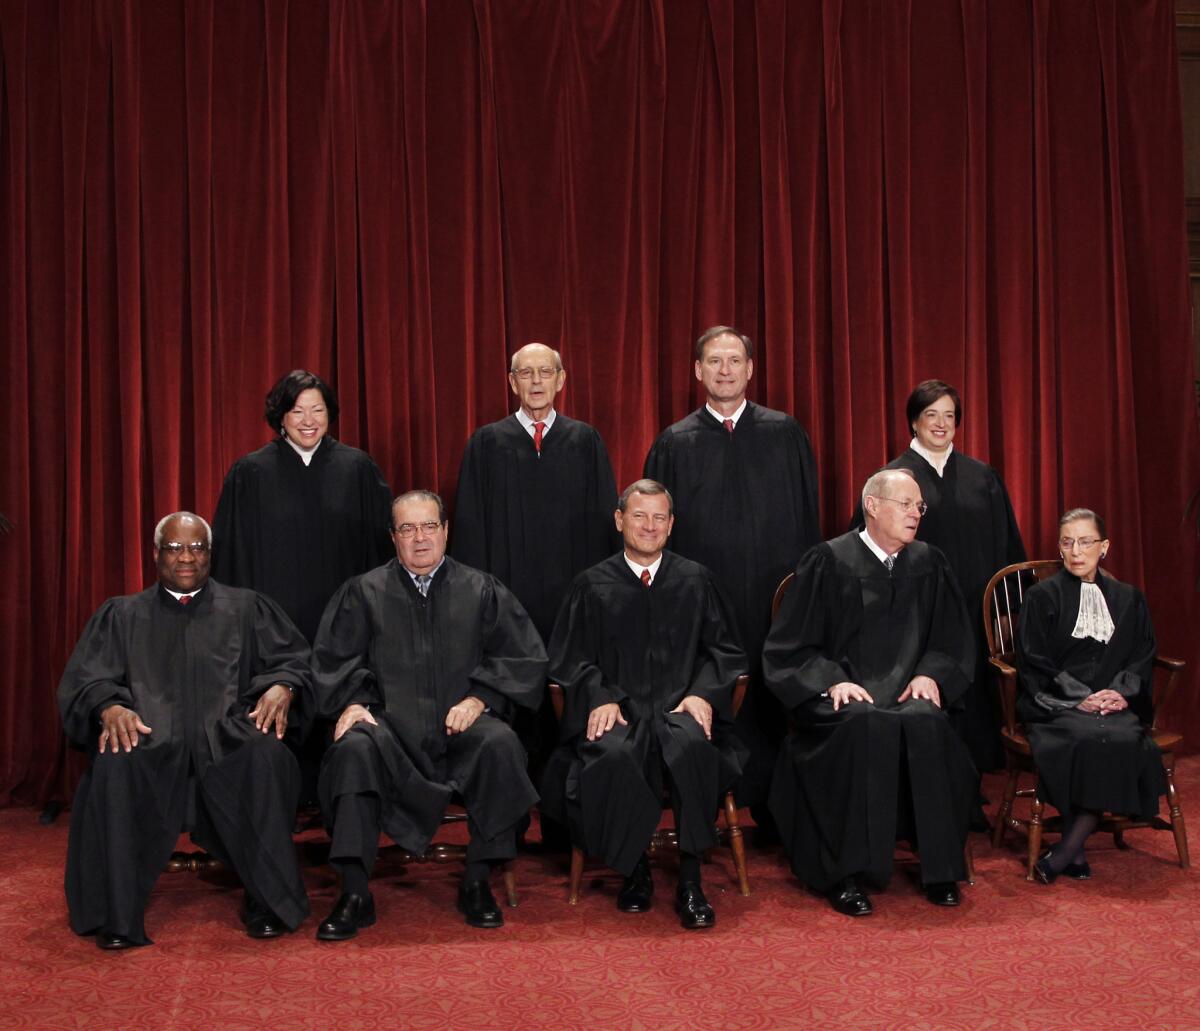 The importance of the all-too-mysterious certiorari process was highlighted Monday when the Supreme Court refused to hear any of the seven appeals on the decisions striking down bans on same-sex marriage.